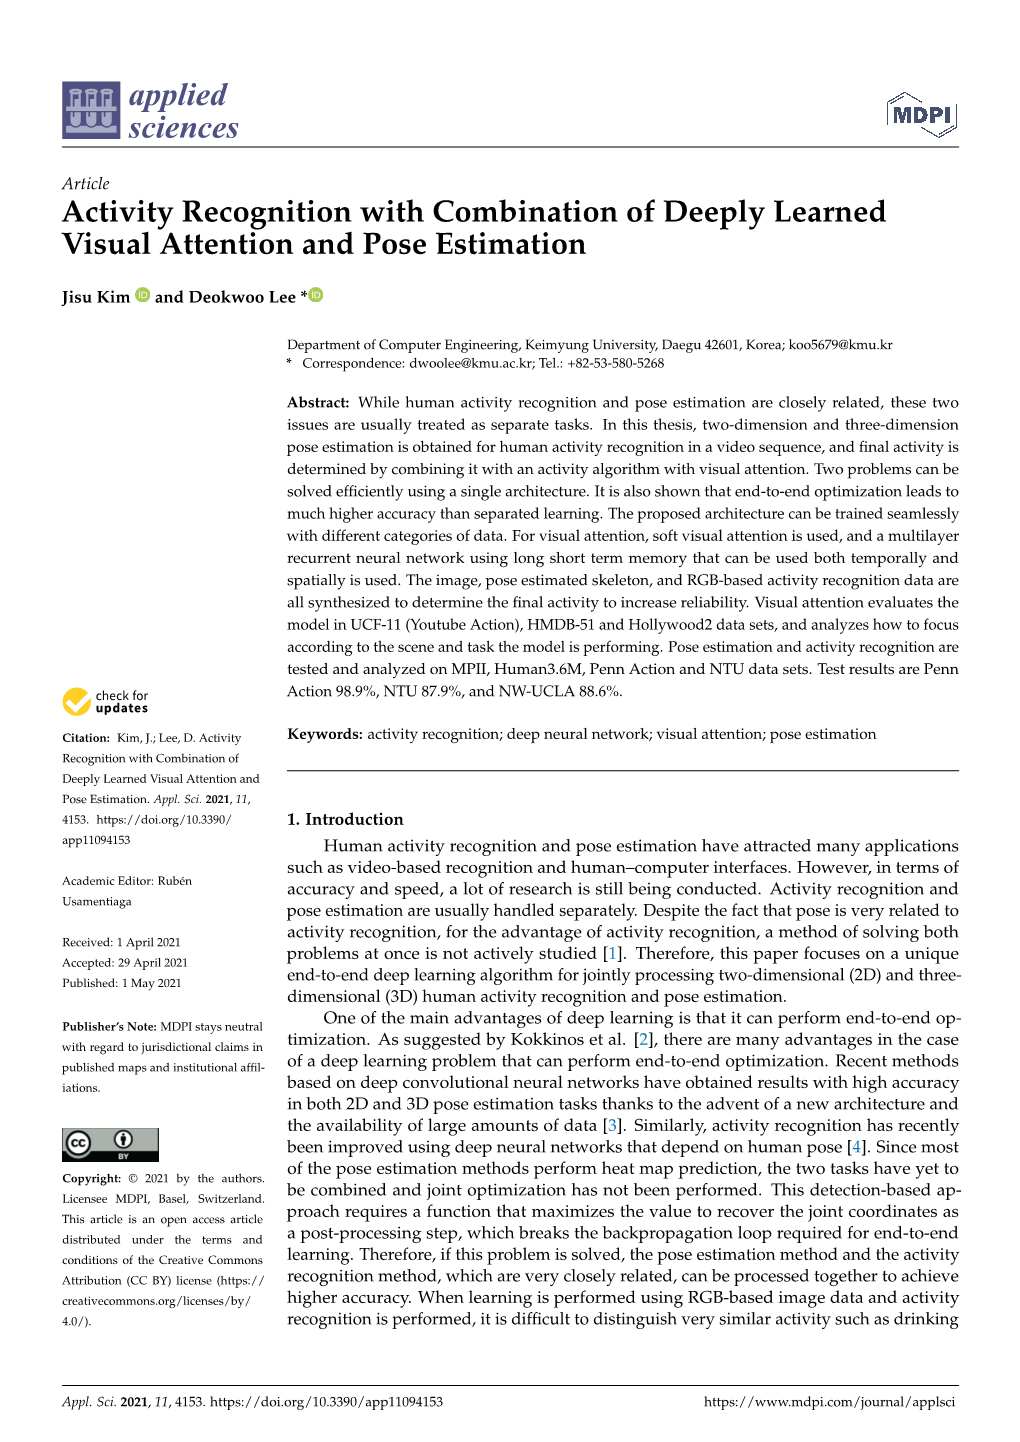 Activity Recognition with Combination of Deeply Learned Visual Attention and Pose Estimation